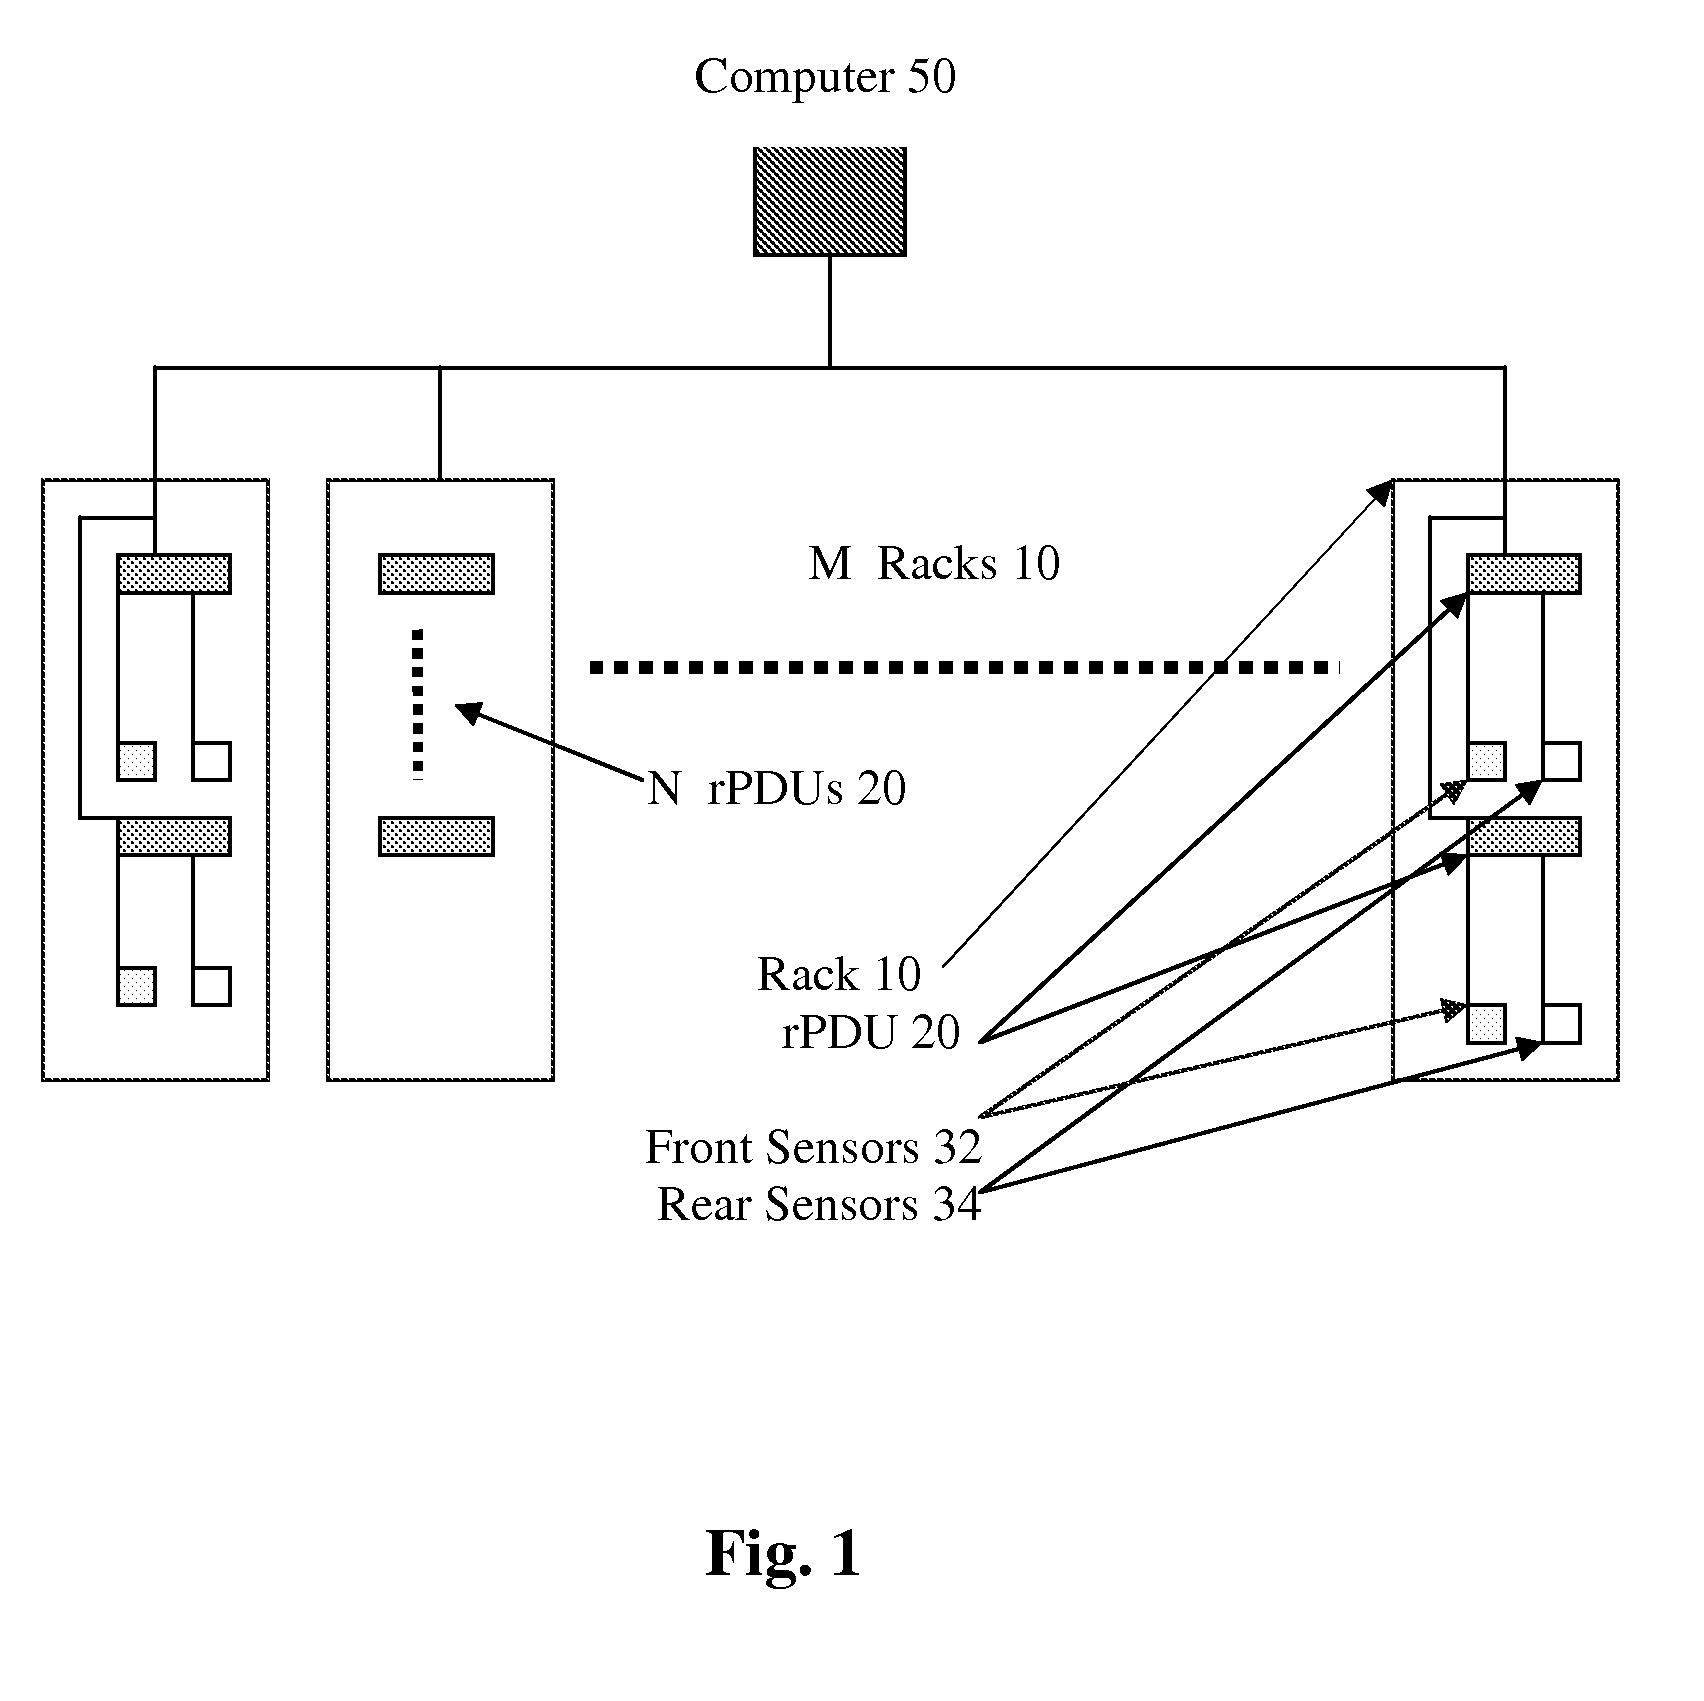 System and method of safe and effective engergy usage and conservation for data centers with rack power distribution units